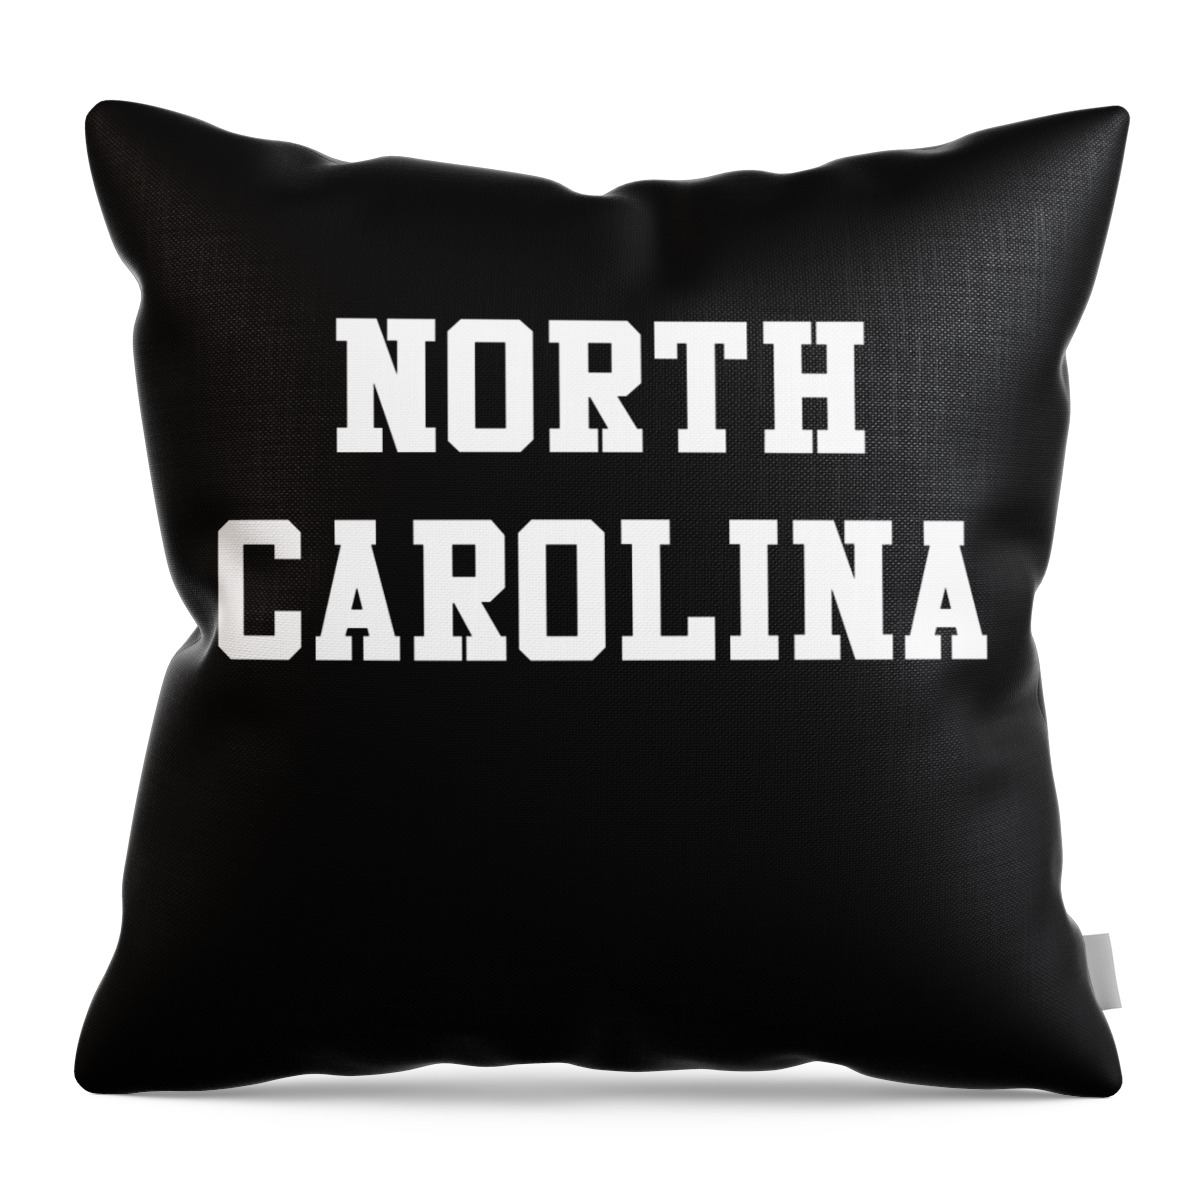 Funny Throw Pillow featuring the digital art North Carolina by Flippin Sweet Gear